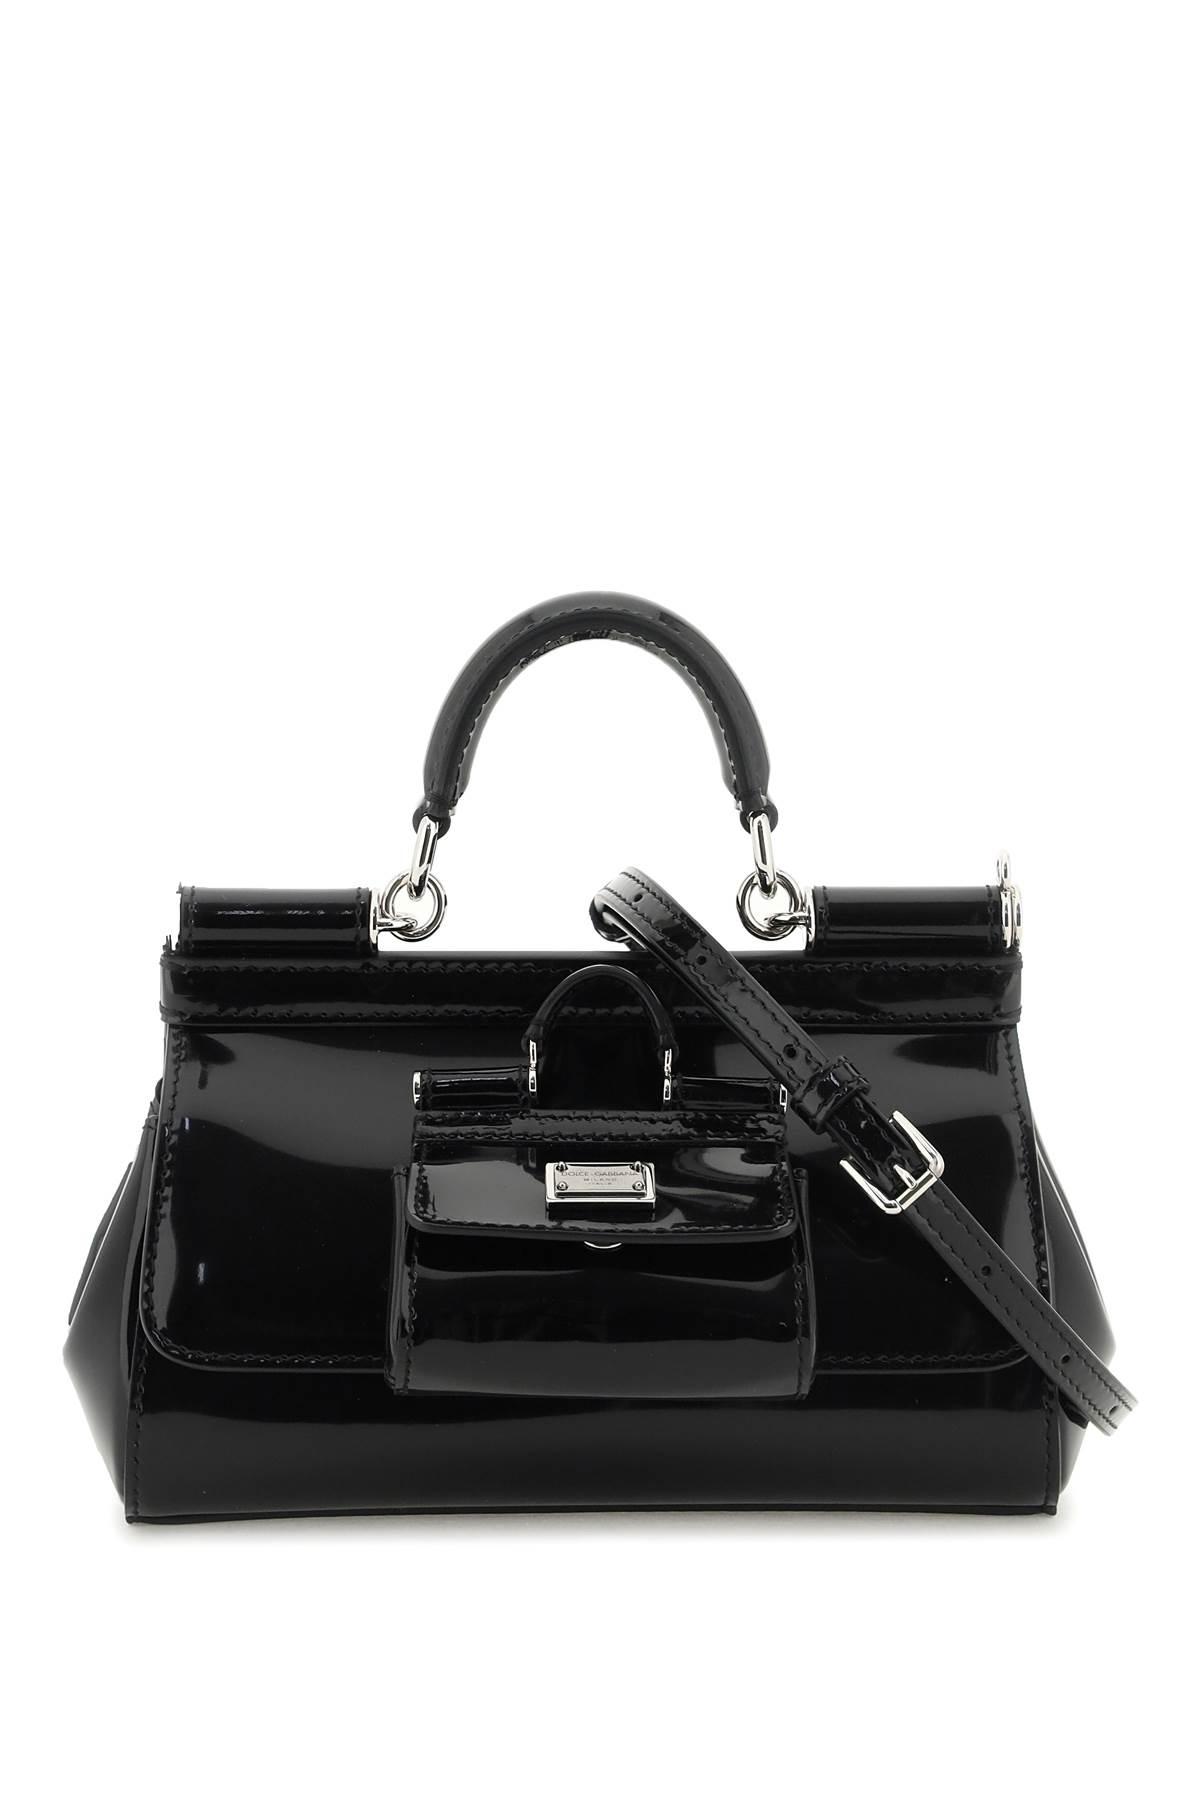 Dolce & Gabbana Patent Leather Small Sicily Bag With Coin Purse in ...